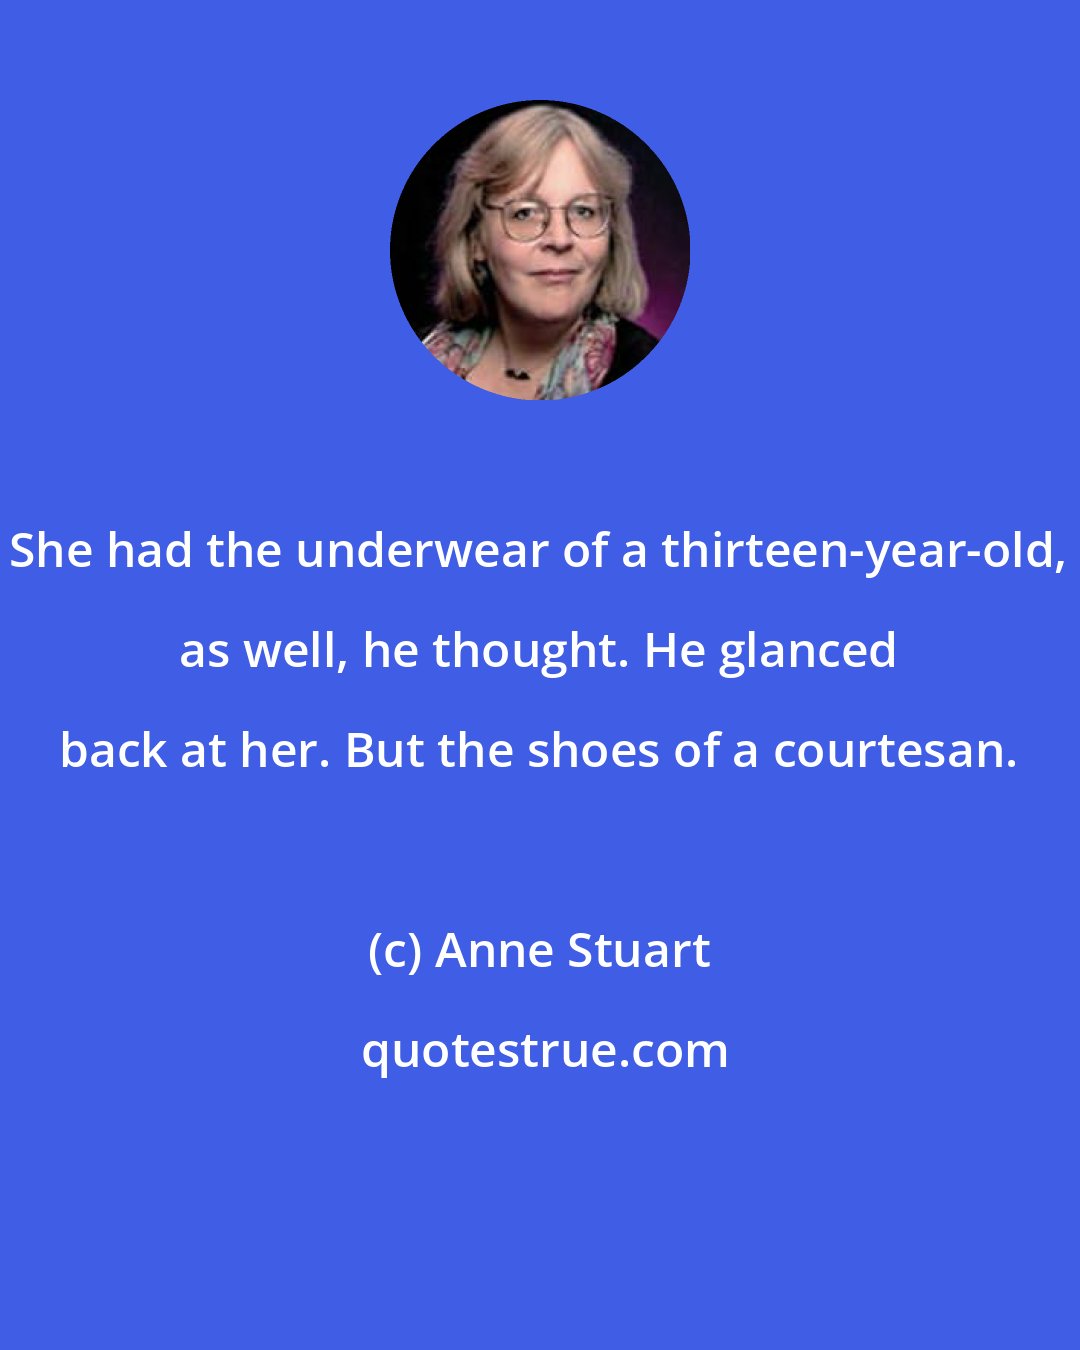 Anne Stuart: She had the underwear of a thirteen-year-old, as well, he thought. He glanced back at her. But the shoes of a courtesan.